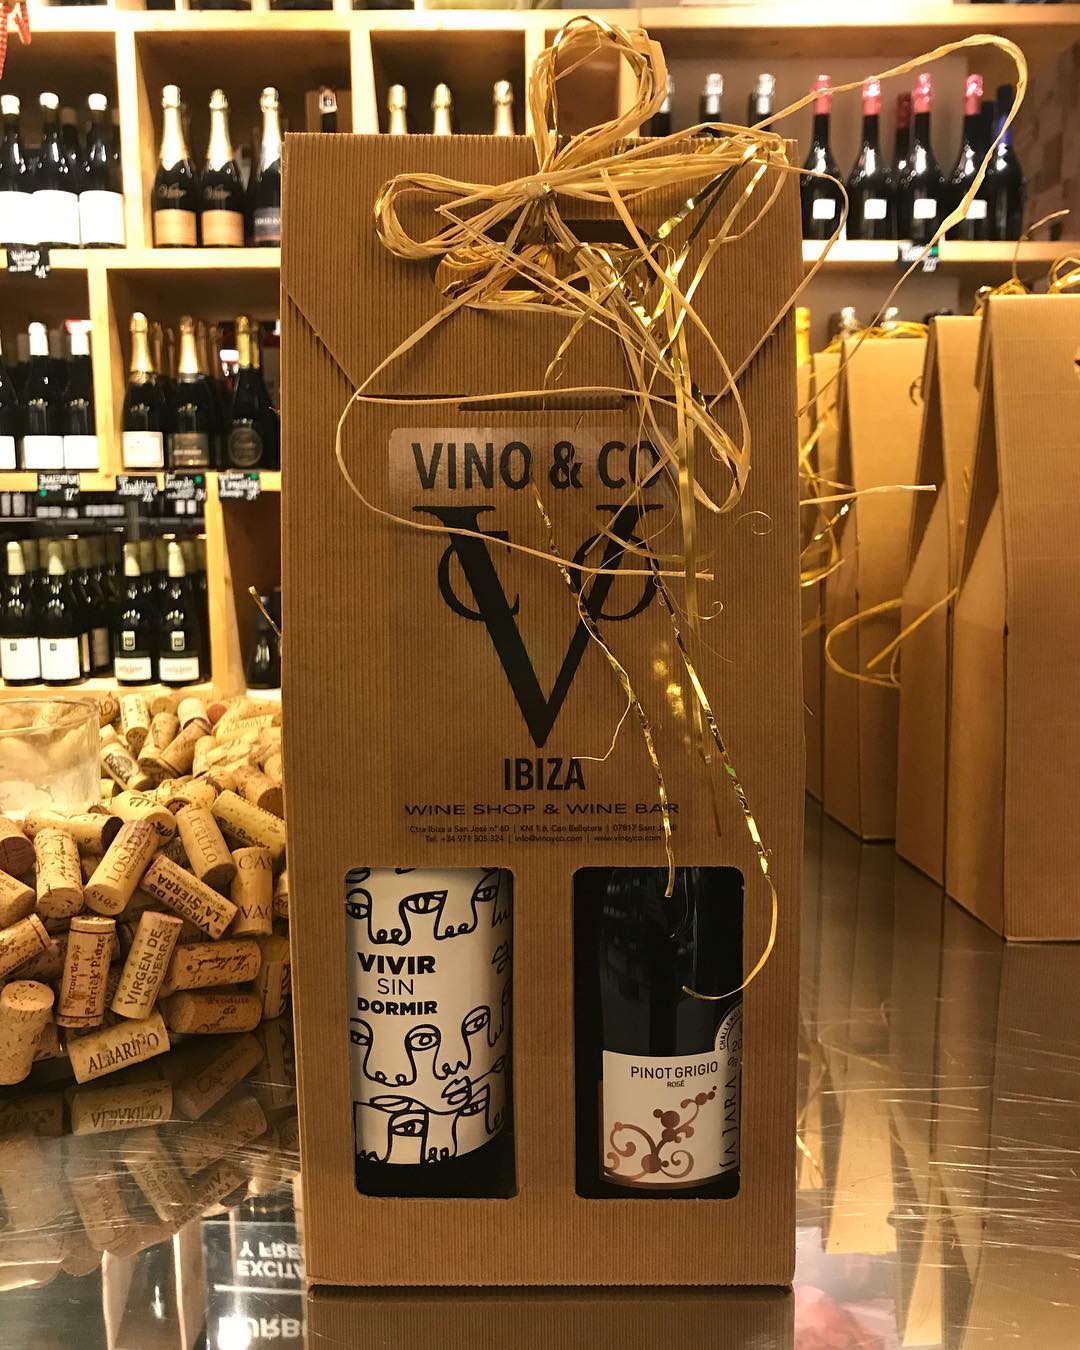 Orders of Christmas pressies lined up! Pass by Vino&Co to get yours sorted! Individual bags, cases of 2, 3 or 6 bottles available! With some festive ribbons of course!